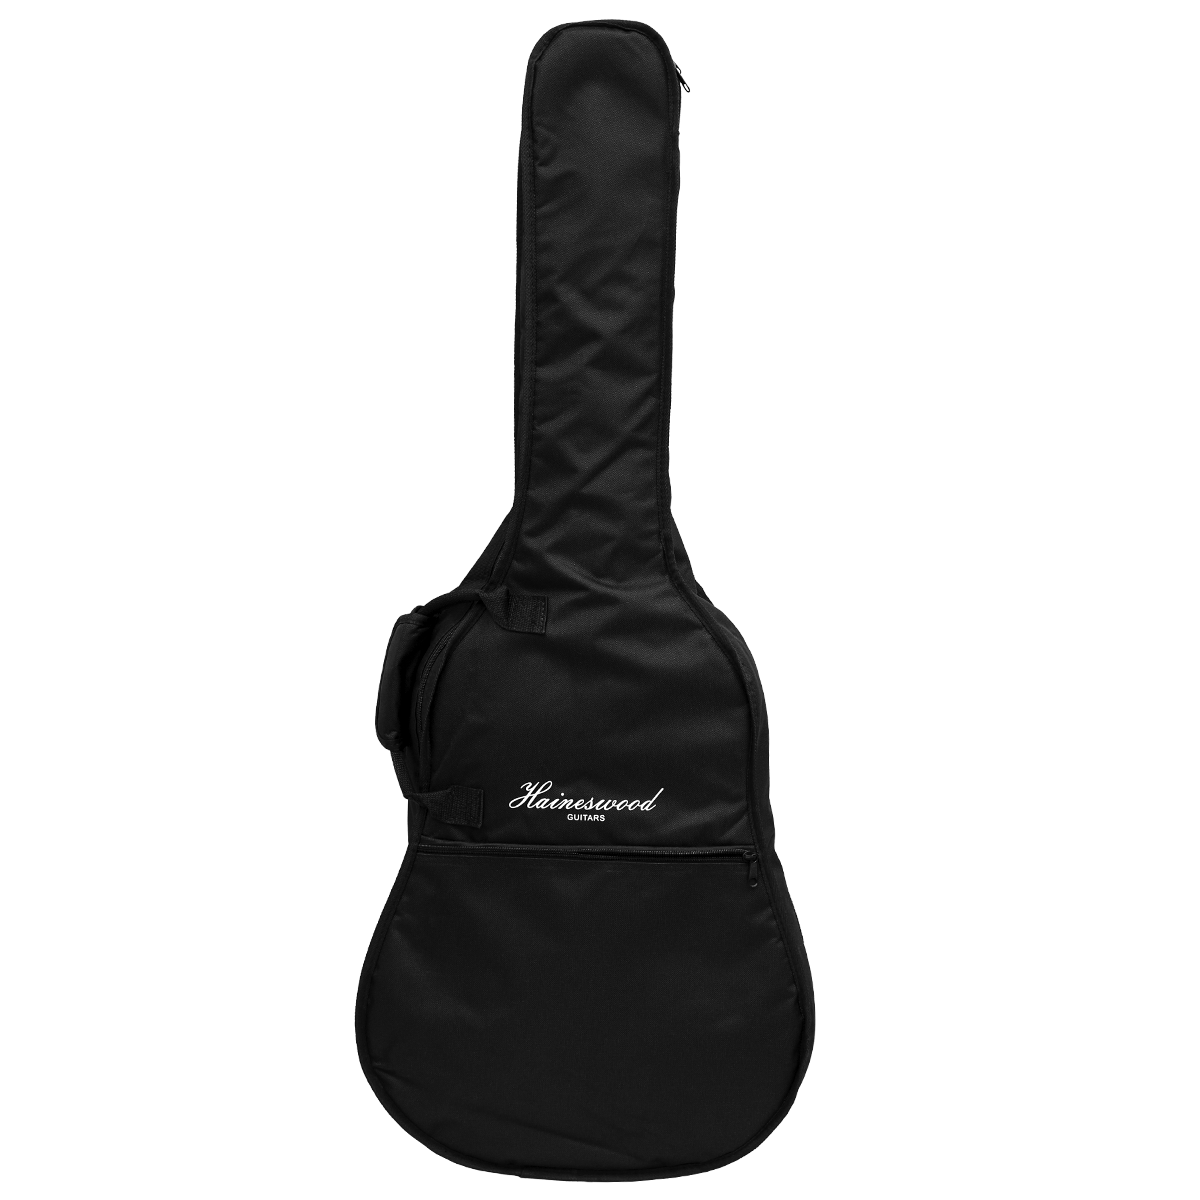 Haineswood ACGB01 Acoustic Guitar Gig Bag (With 5 mm Padding)